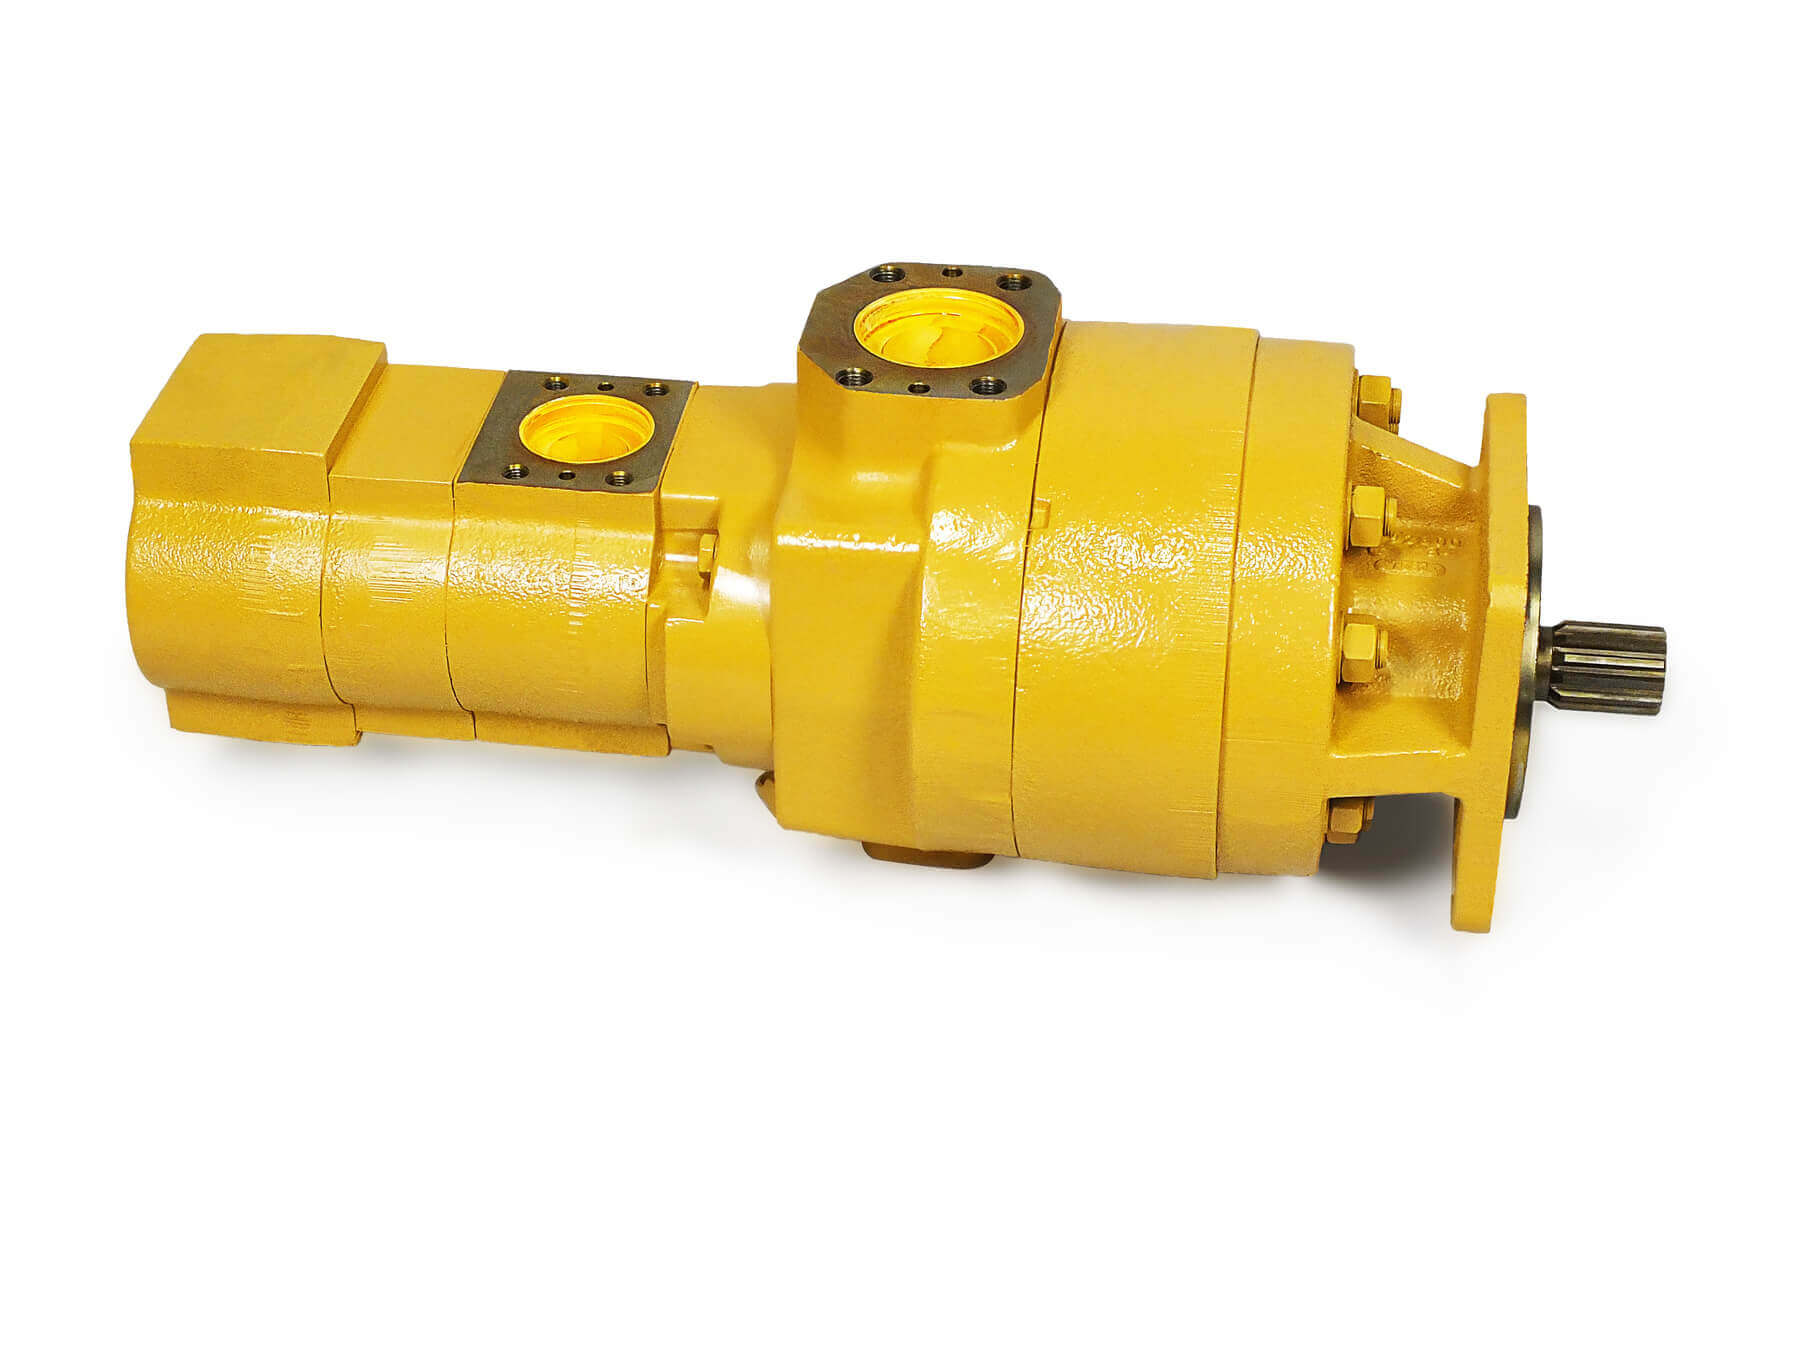 Hydraulic Pumps for Sale Online